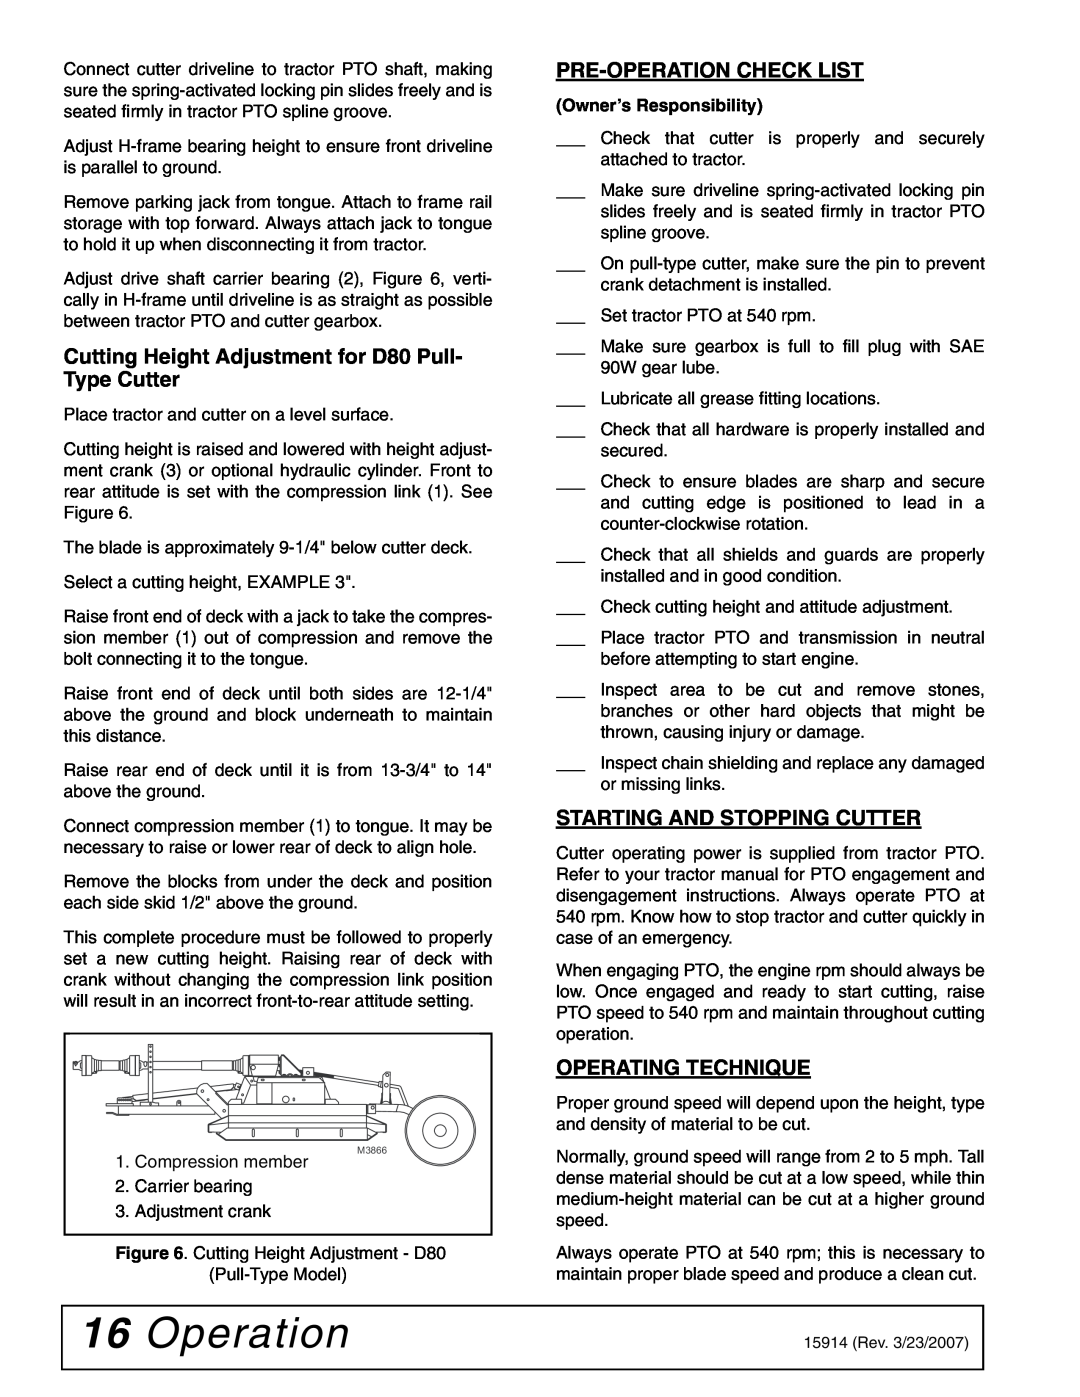 Woods Equipment MD80-2 manual Pre-Operationcheck List, Starting And Stopping Cutter, Operating Technique 